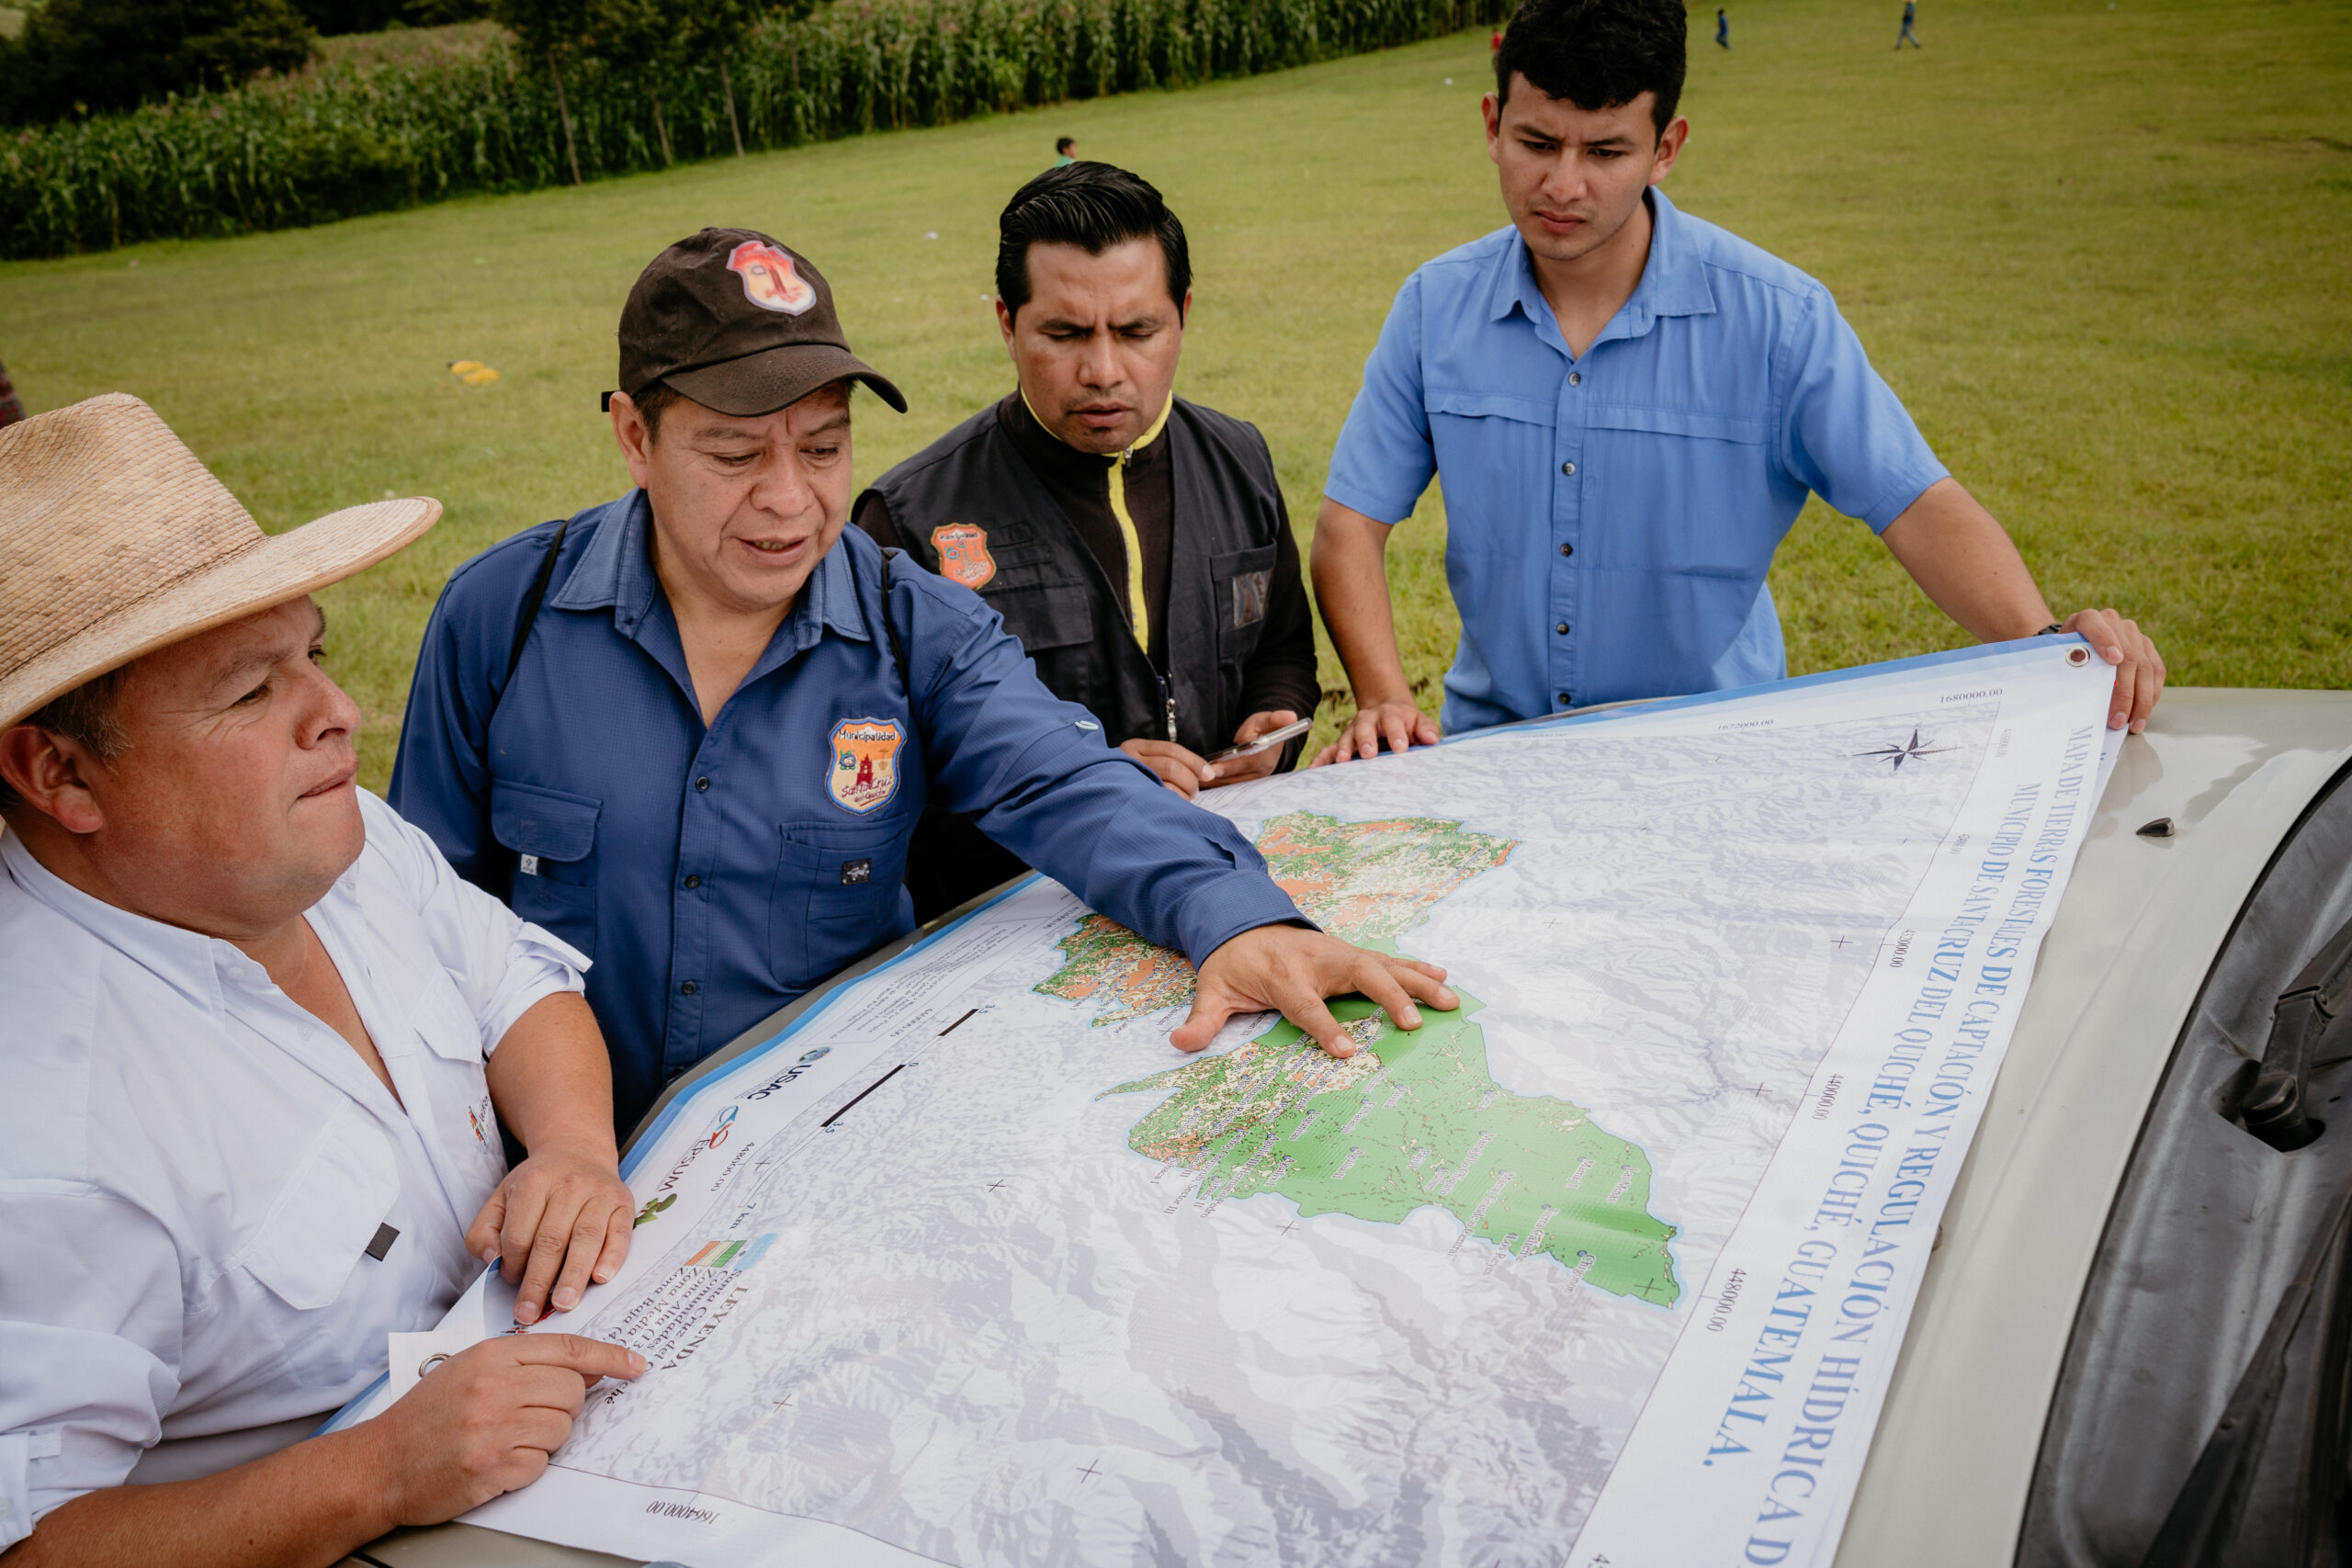 Water For People team members in Guatemala discuss watersheds and water source protection with community members.